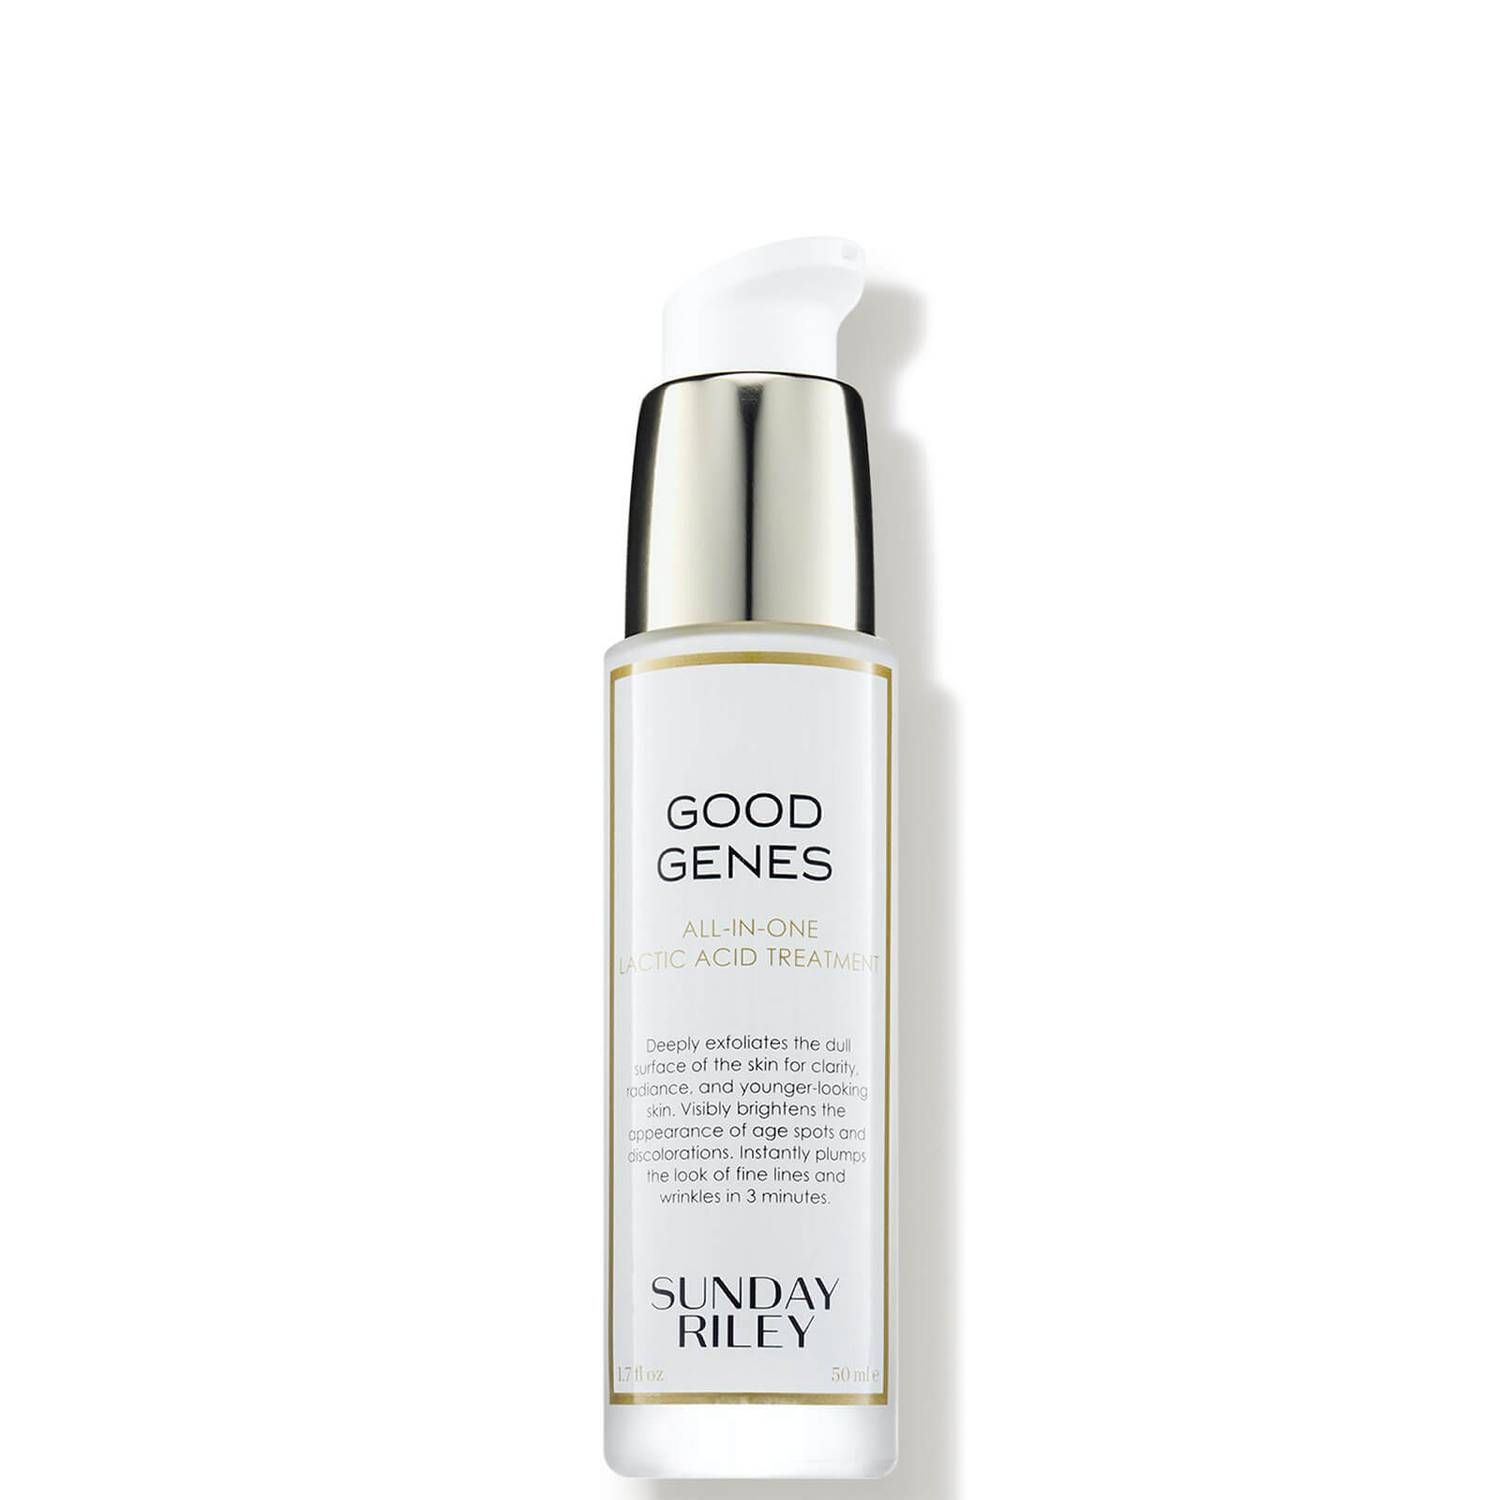 Sunday Riley GOOD GENES All-In-One Lactic Acid Treatment (1.7oz) | Skinstore